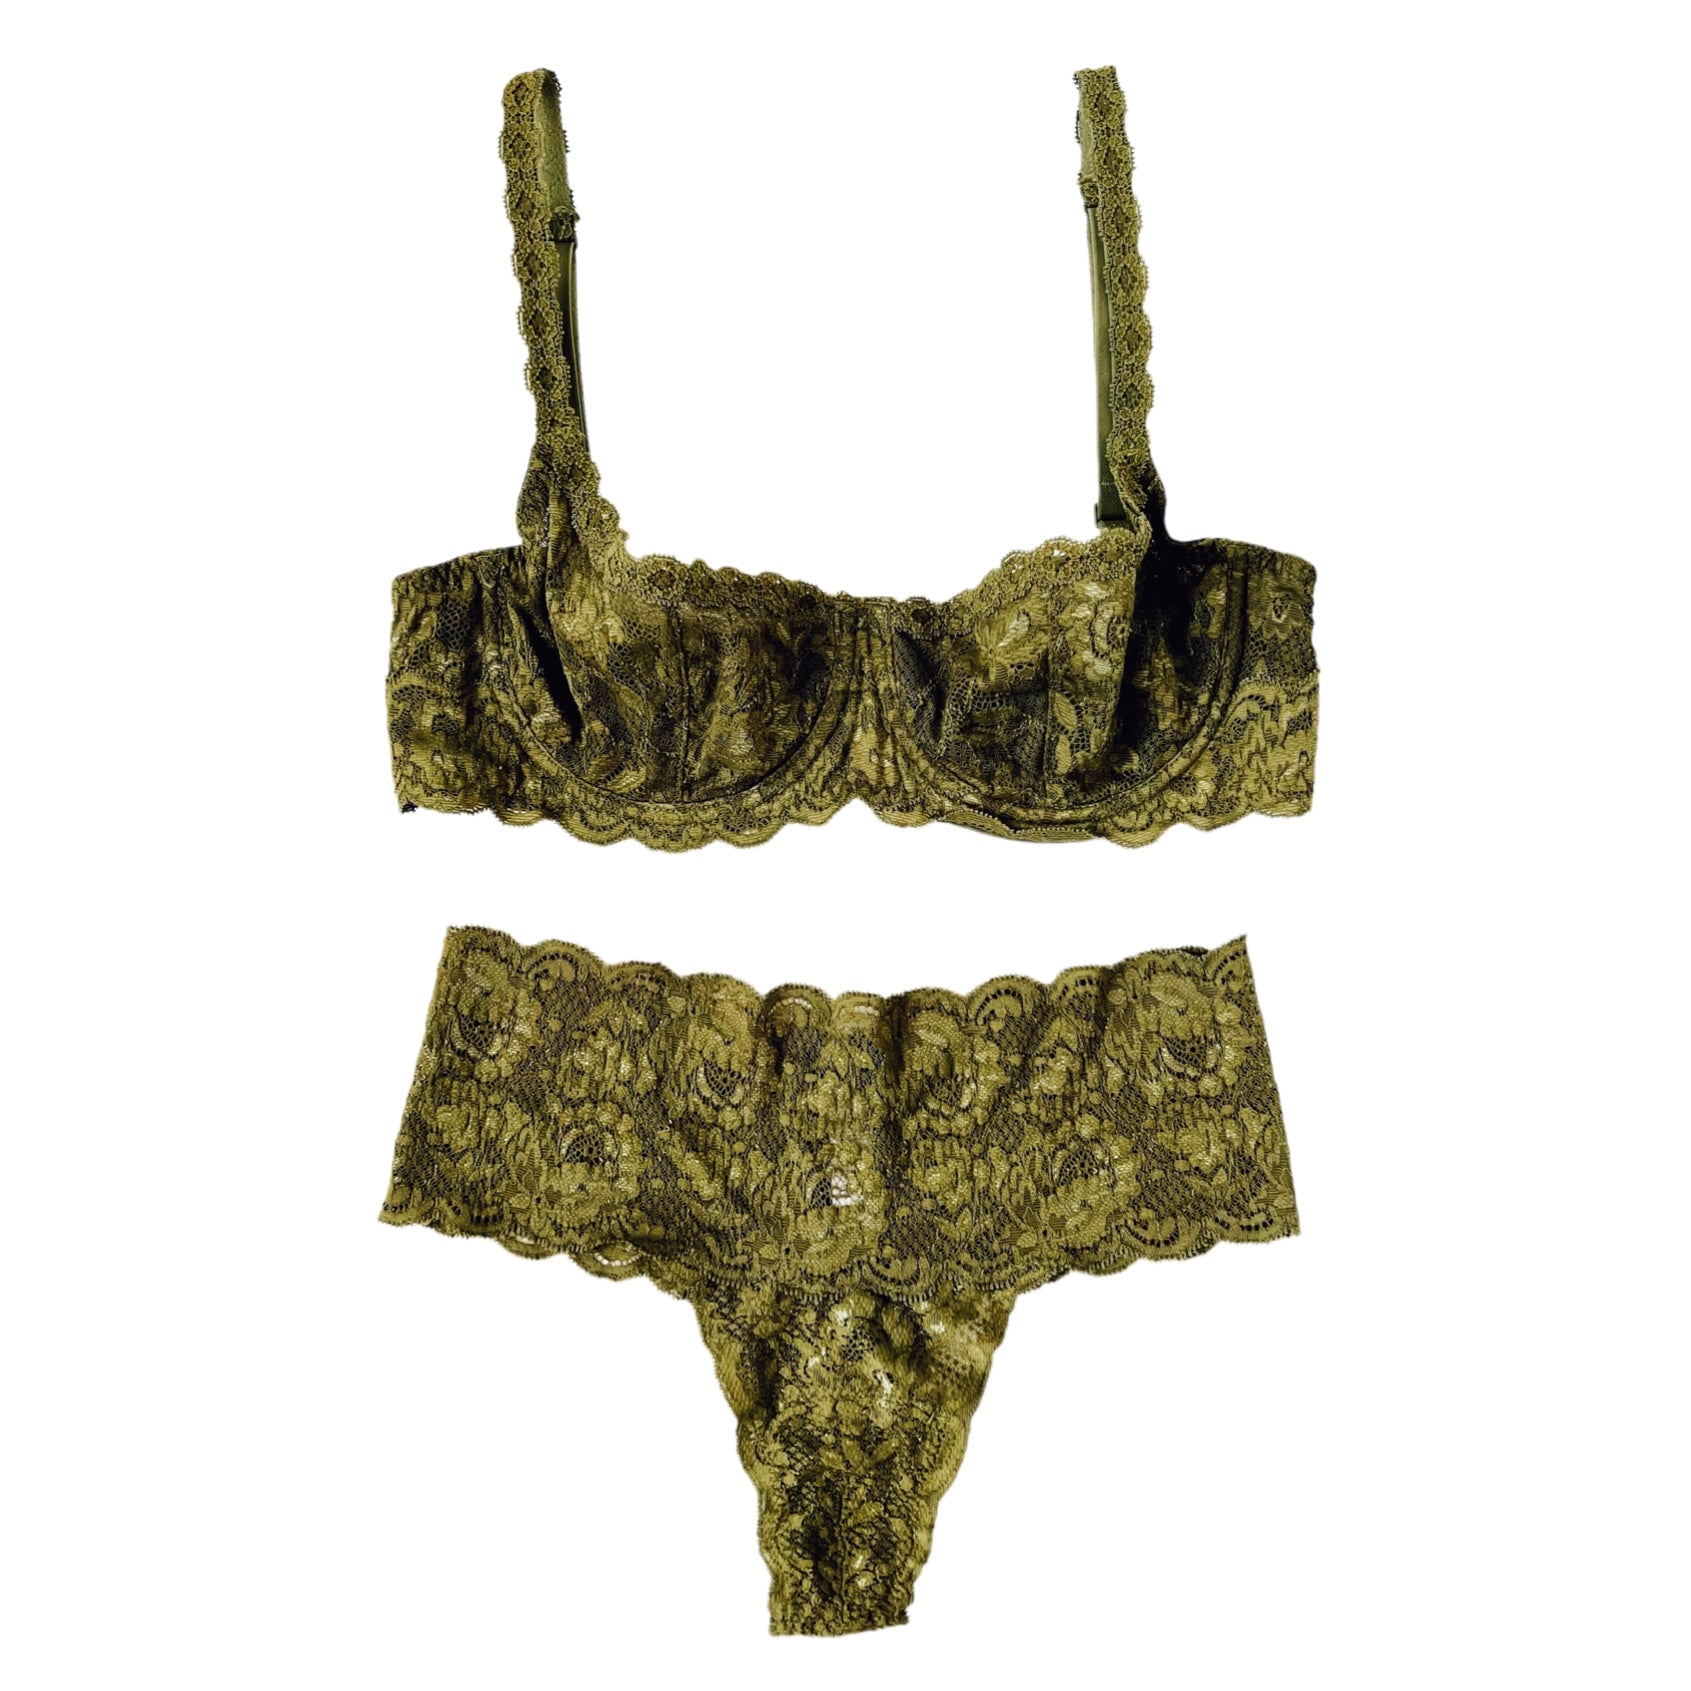 Cosabella Mossy Green Lingerie Set (S)